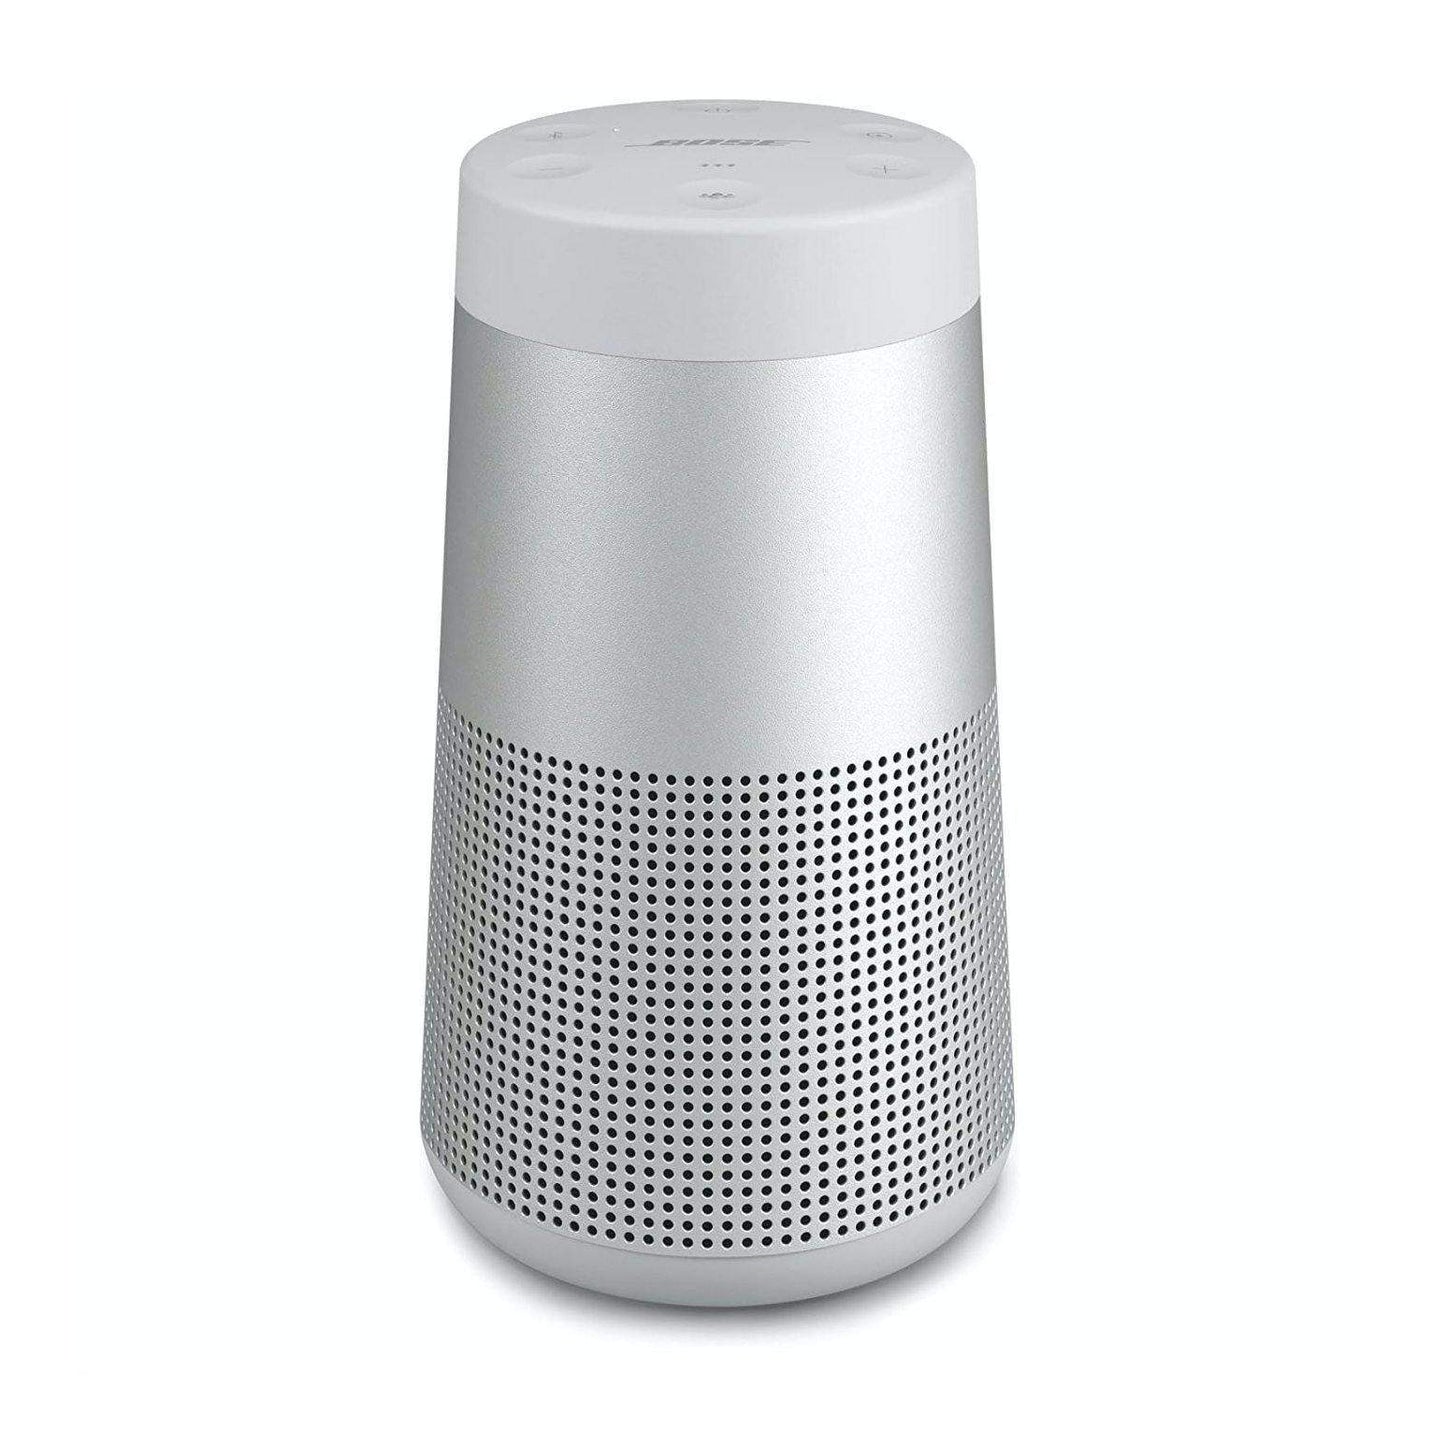 Bose SoundLink Revolve BlueTooth Speaker II - The Luxury Promotional Gifts Company Limited